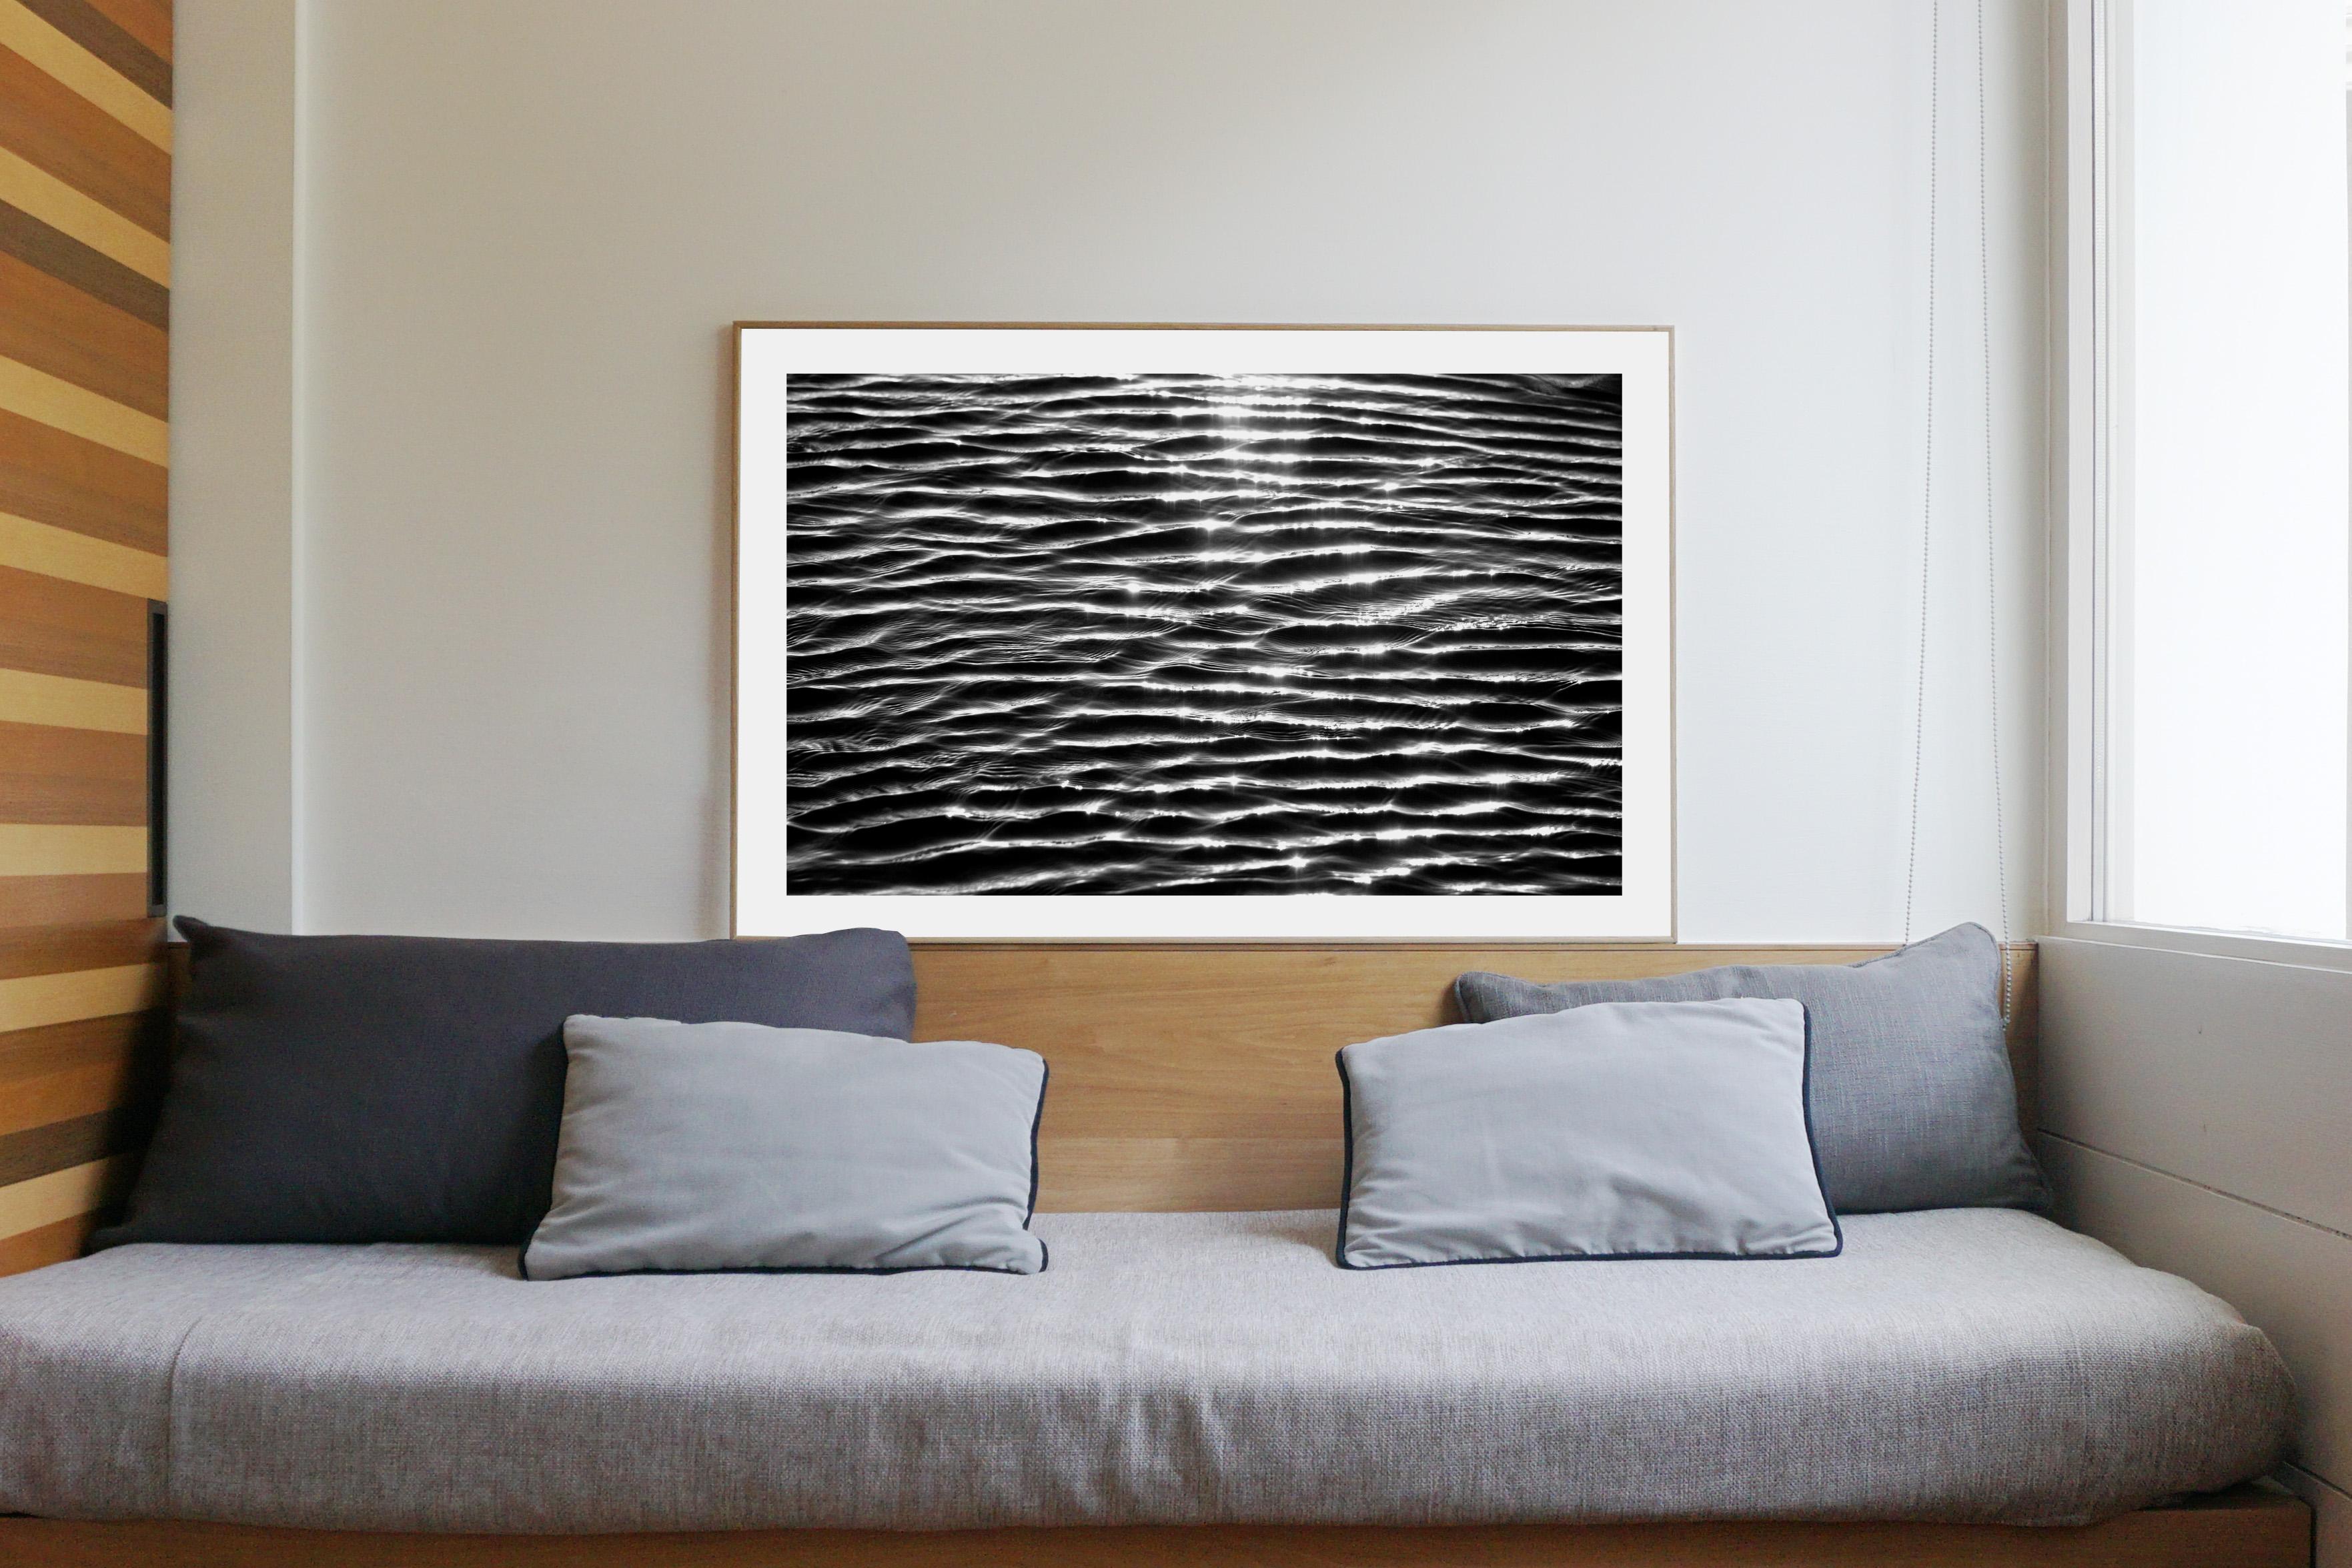 Extra Large Black and White Giclée Print of Tranquil Water Patterns, Seascape - Photograph by Kind of Cyan